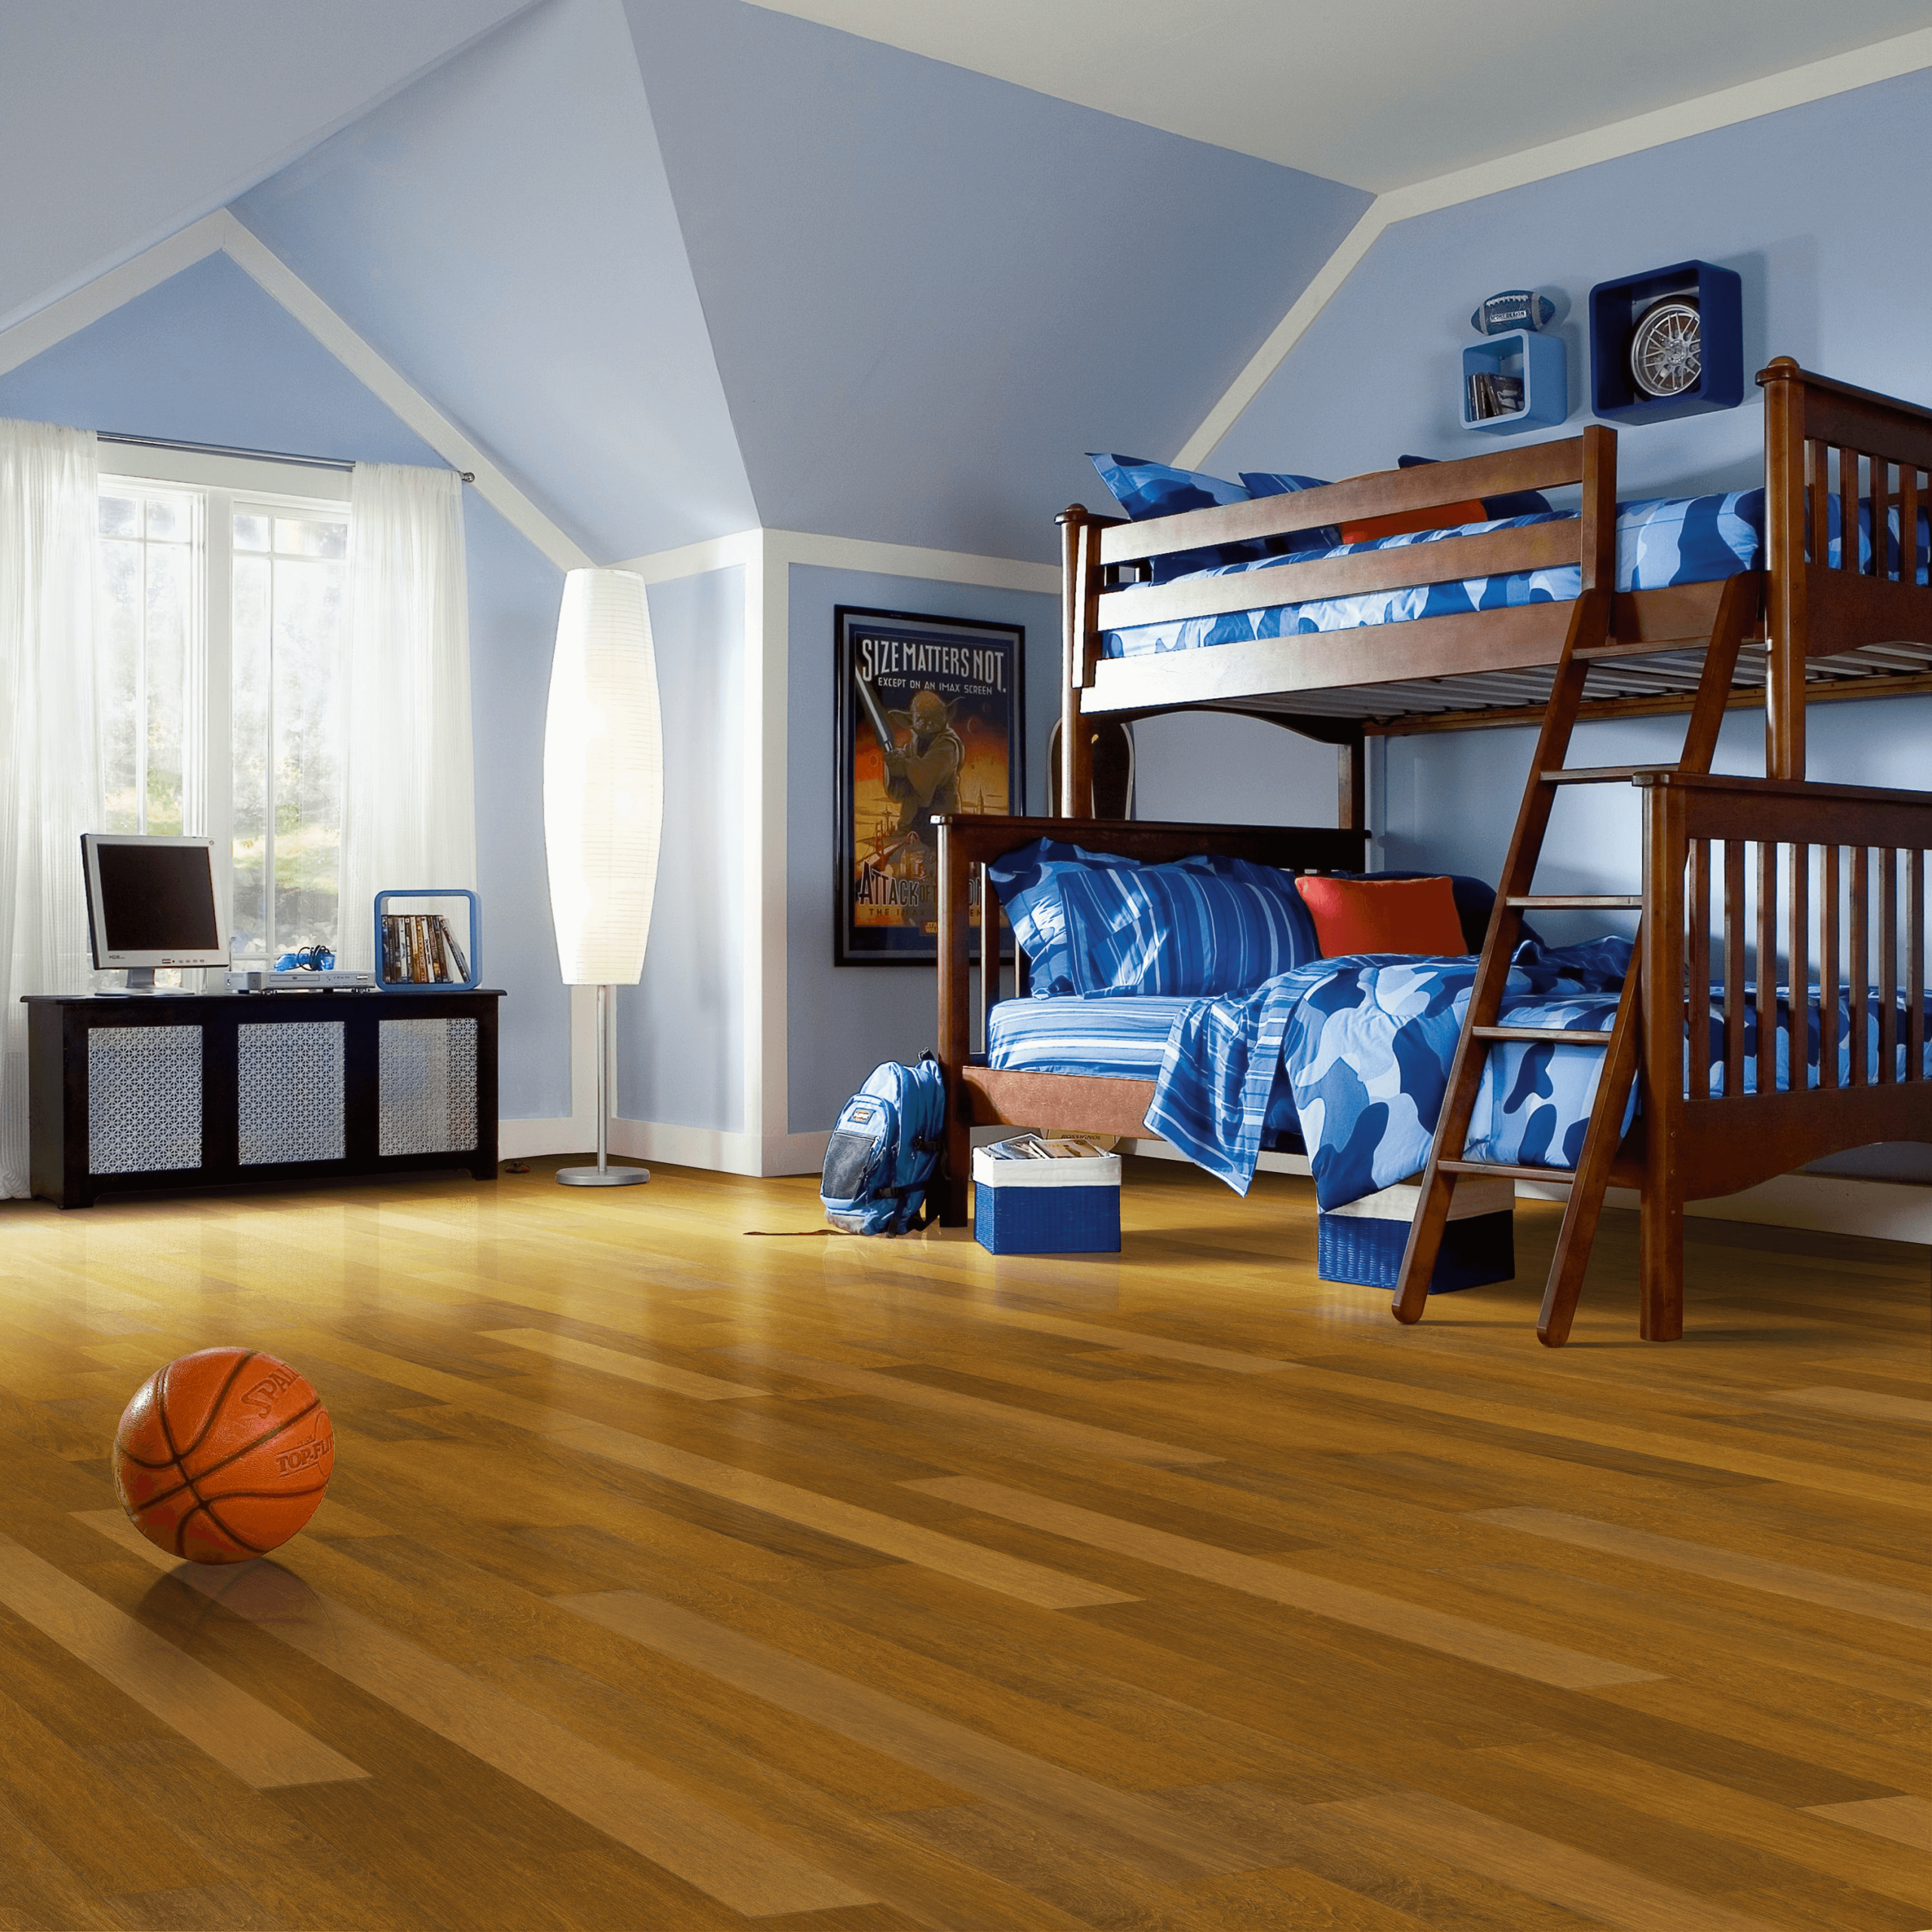 Kids bedroom with bunk beds and wood flooring featured